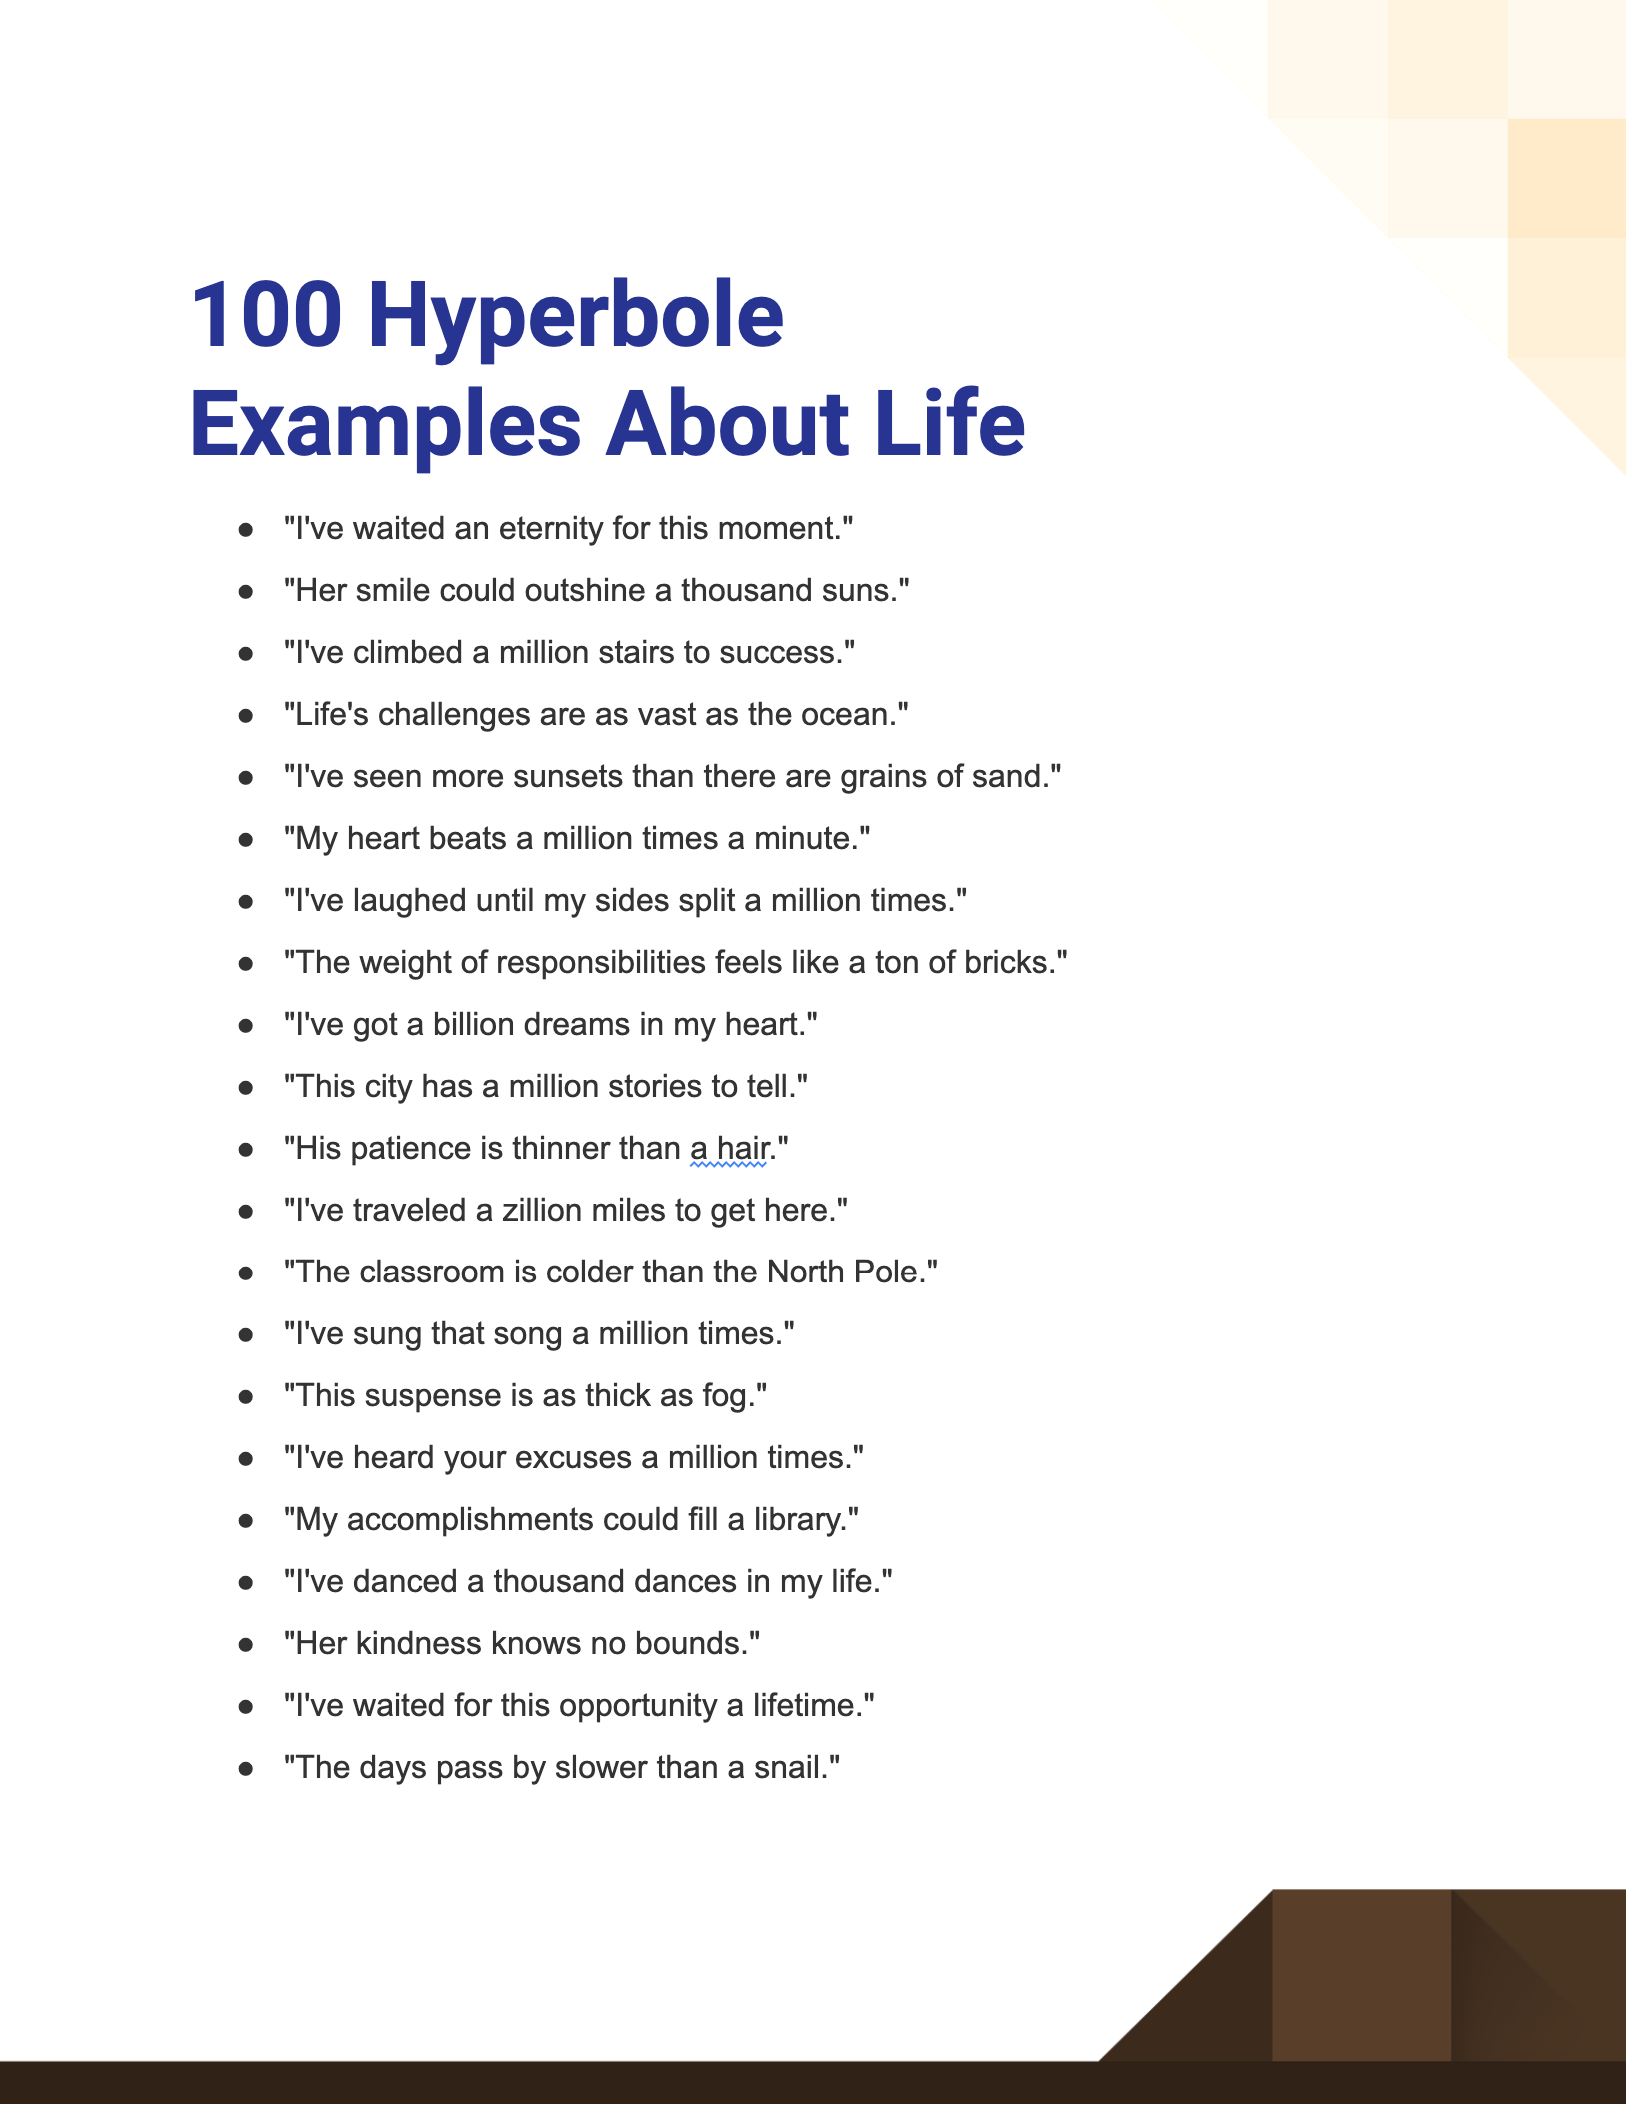 hyperbole examples about life1